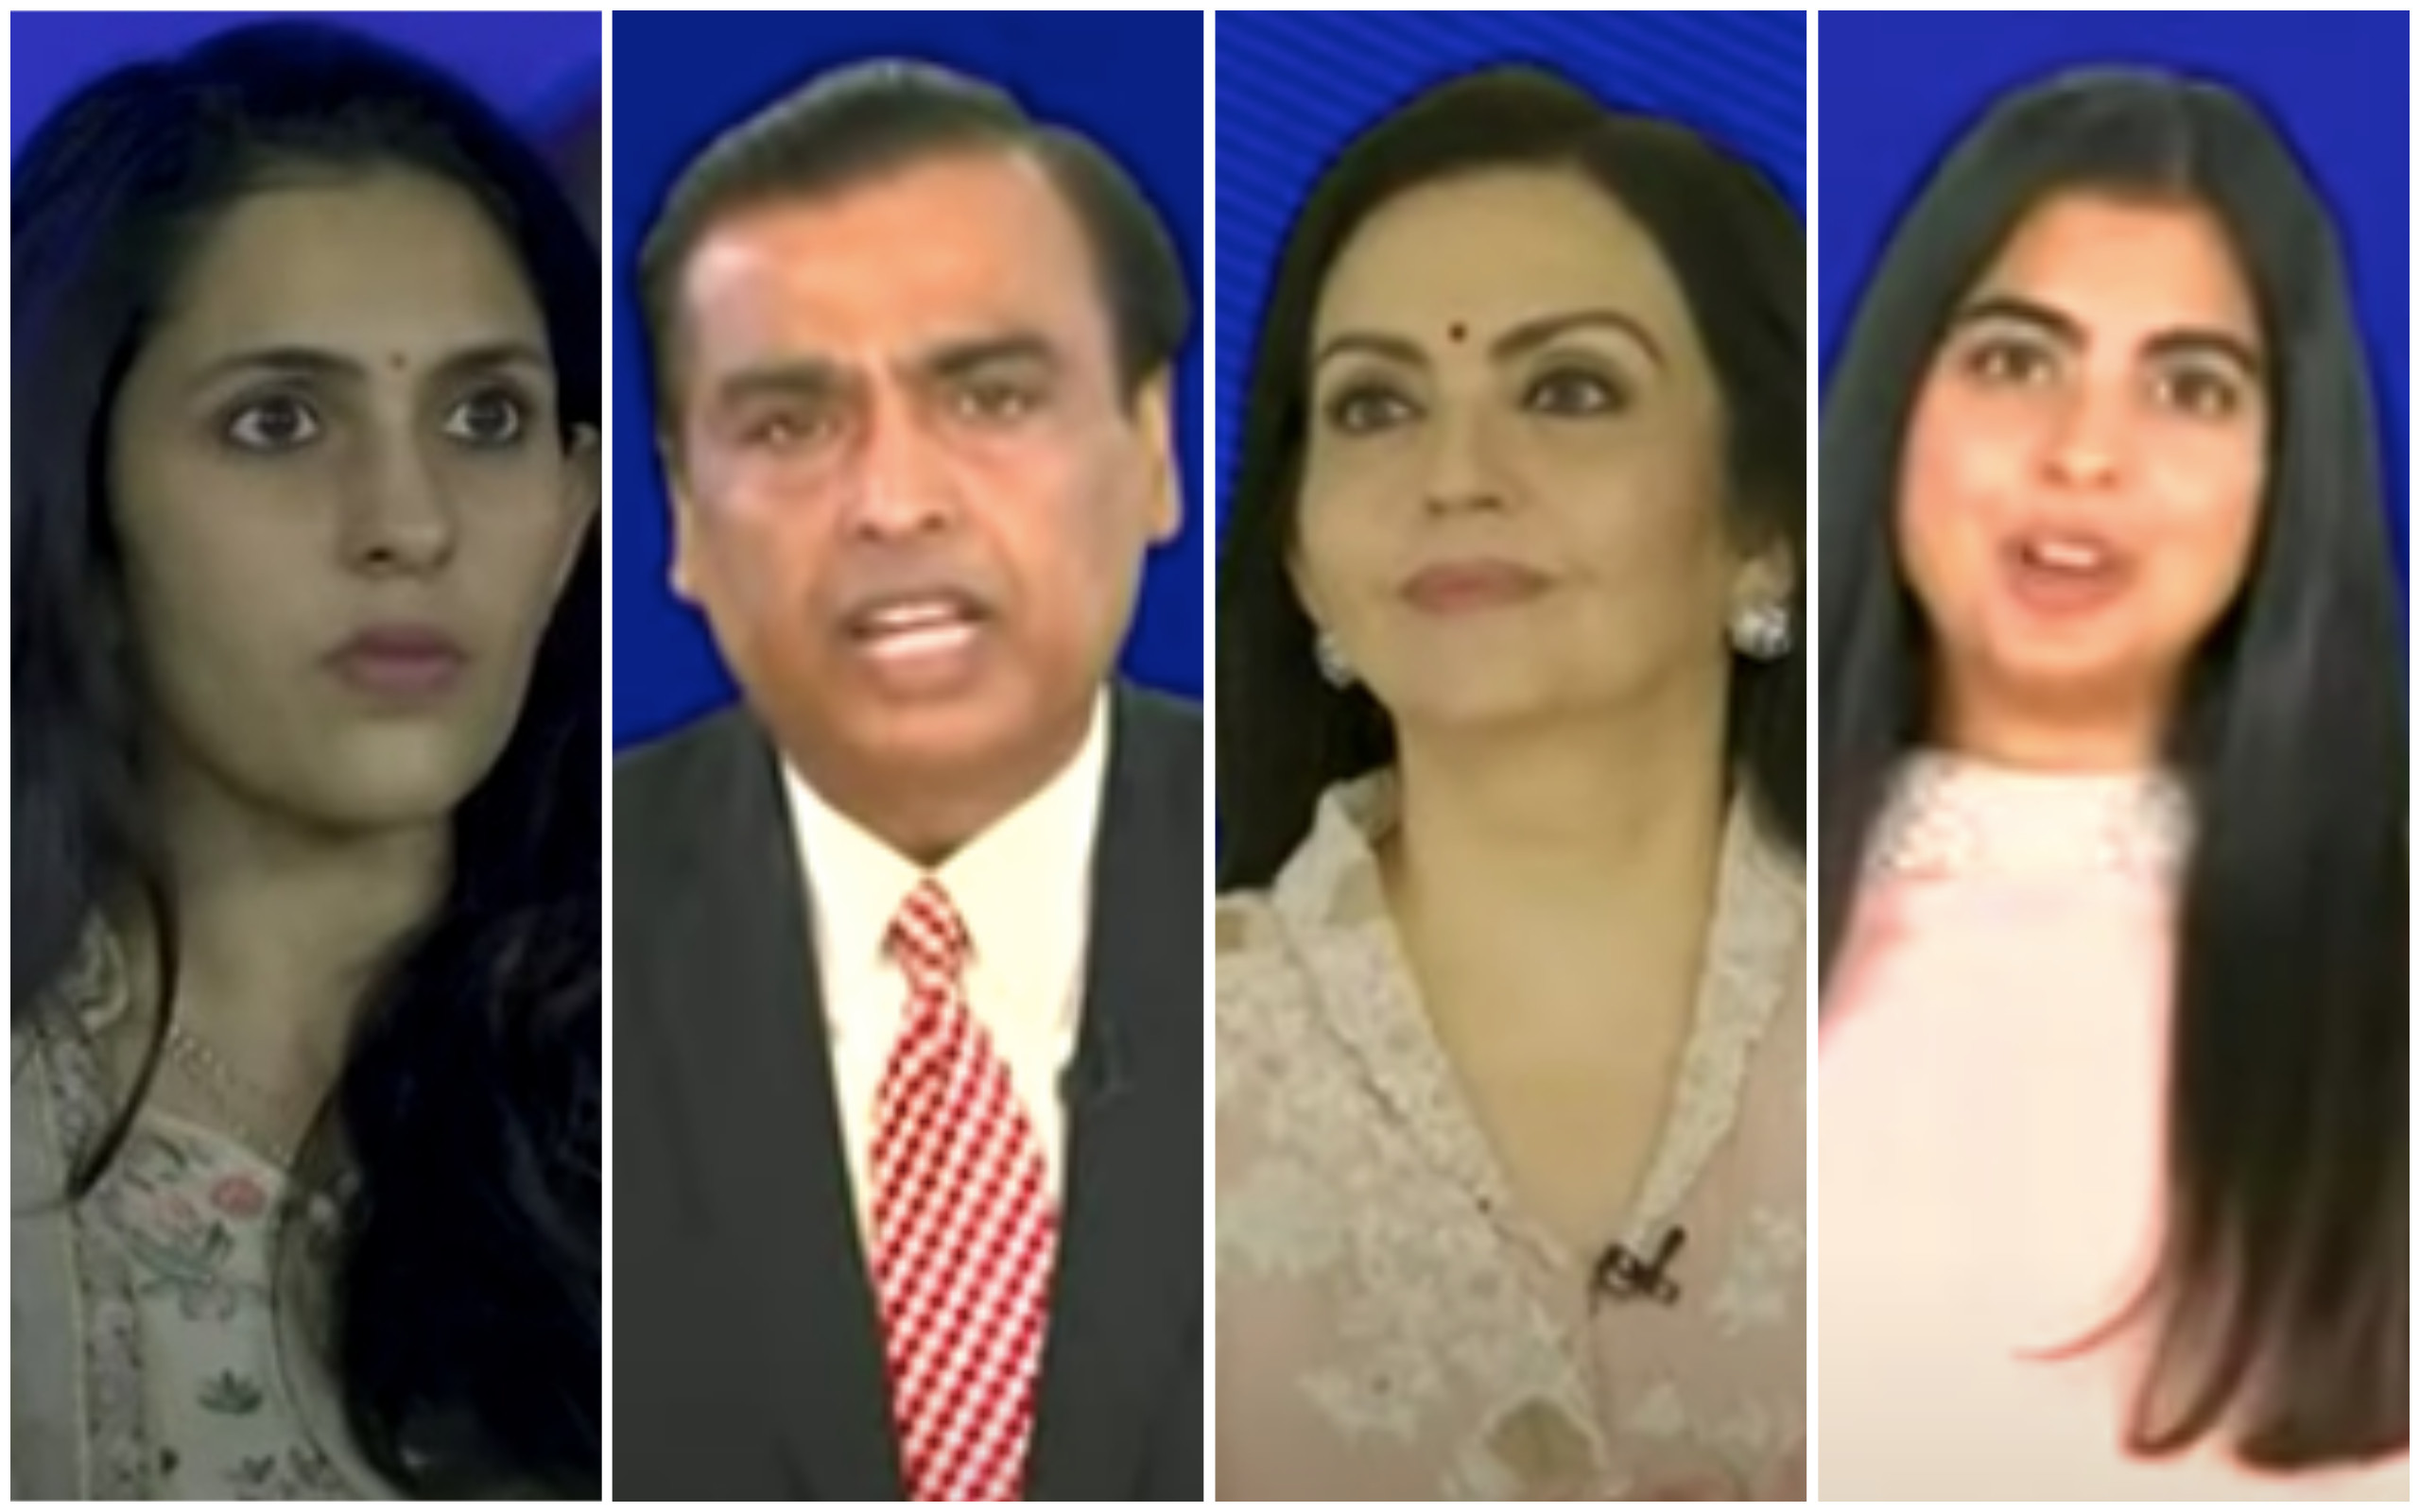 From left: Shloka Mehta, Mukesh Ambani, his wife Nita and their daughter Isha all appeared at the Reliance Industries AGM. Photos: YouTube